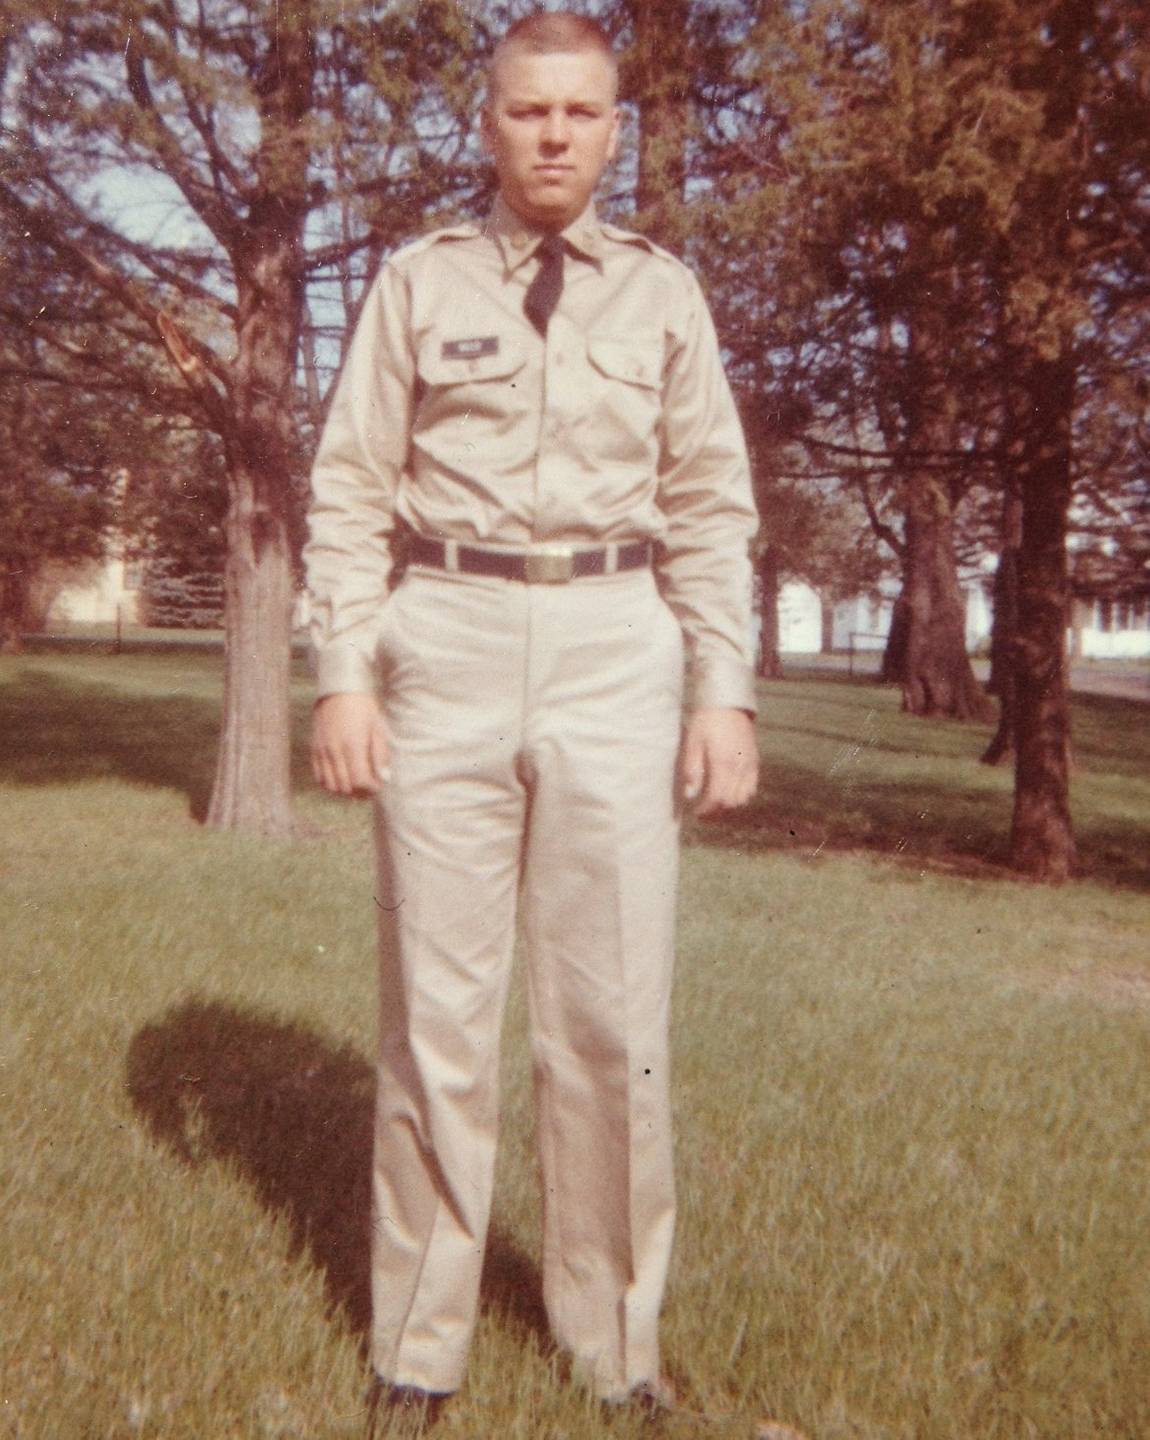 Young U.S. soldier in uniform, standing in a field of grass and trees.